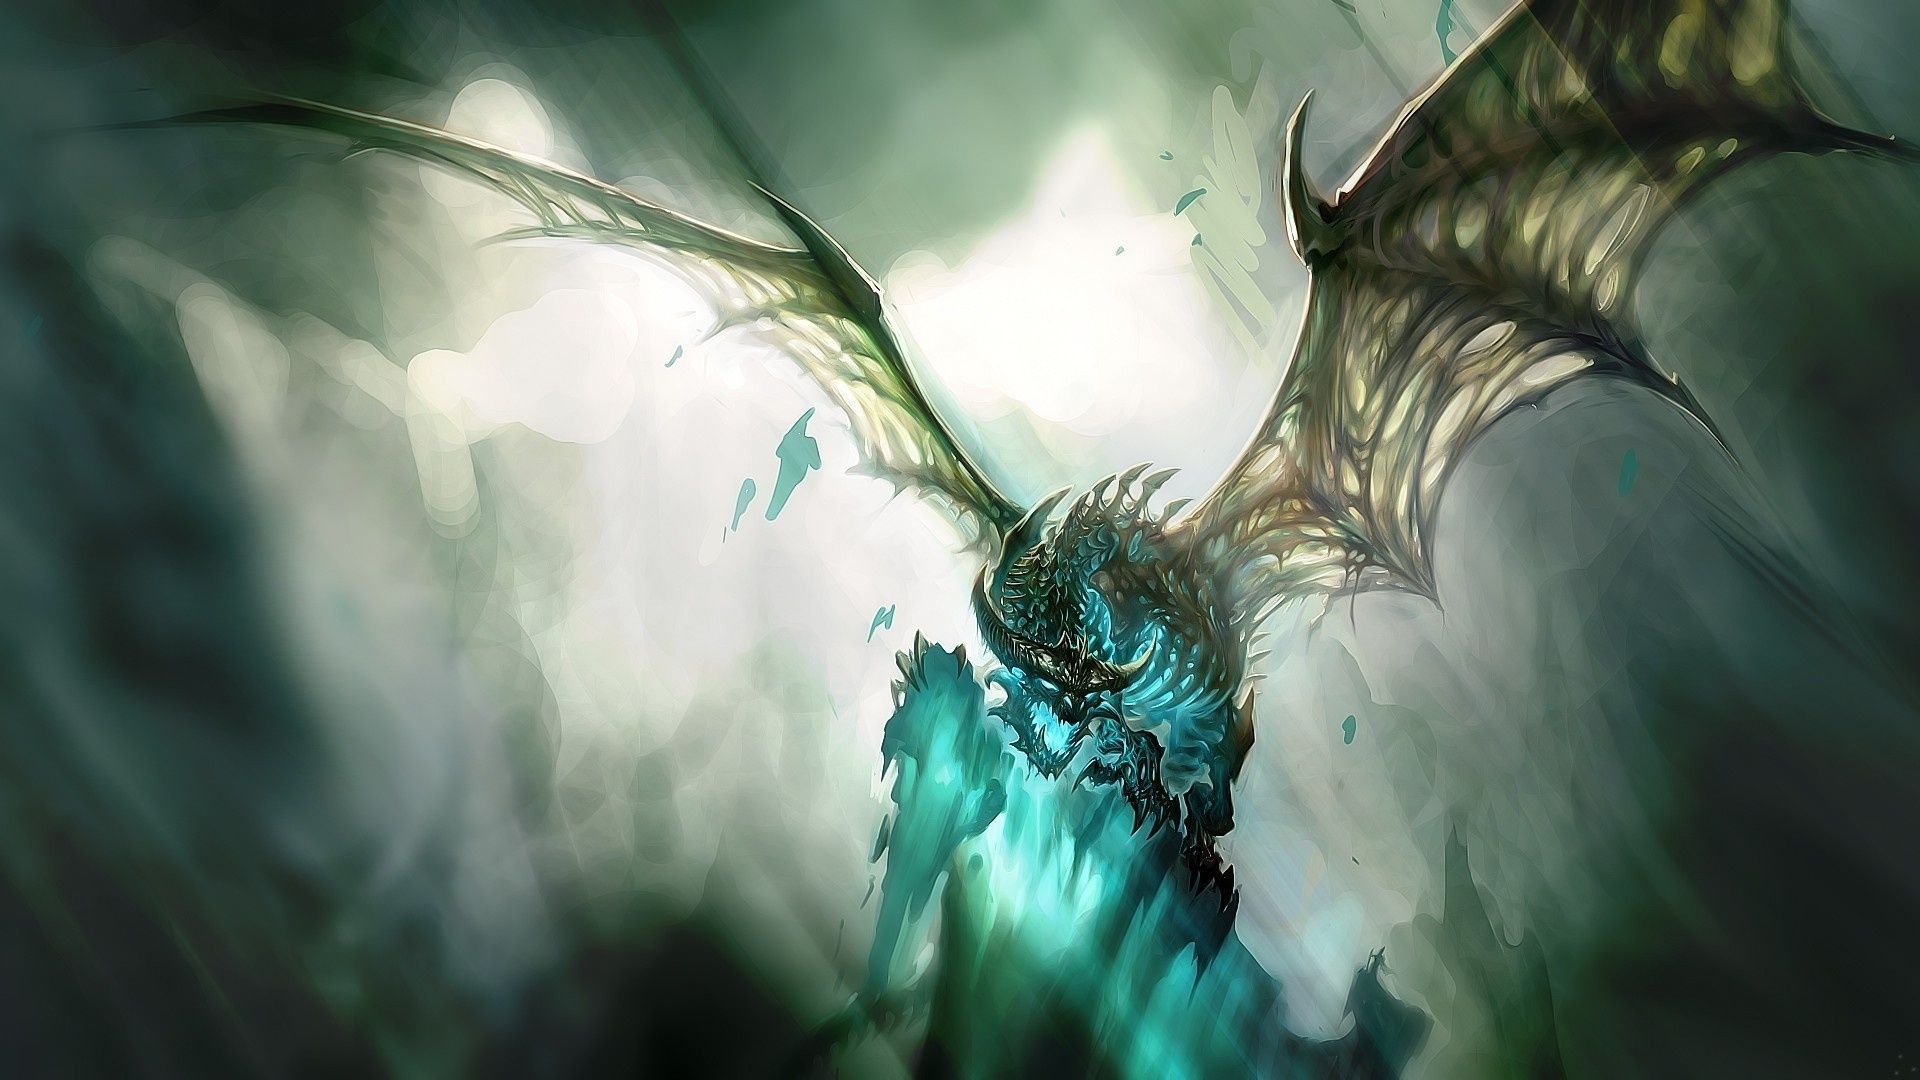 world of warcraft dragon Wallpapers